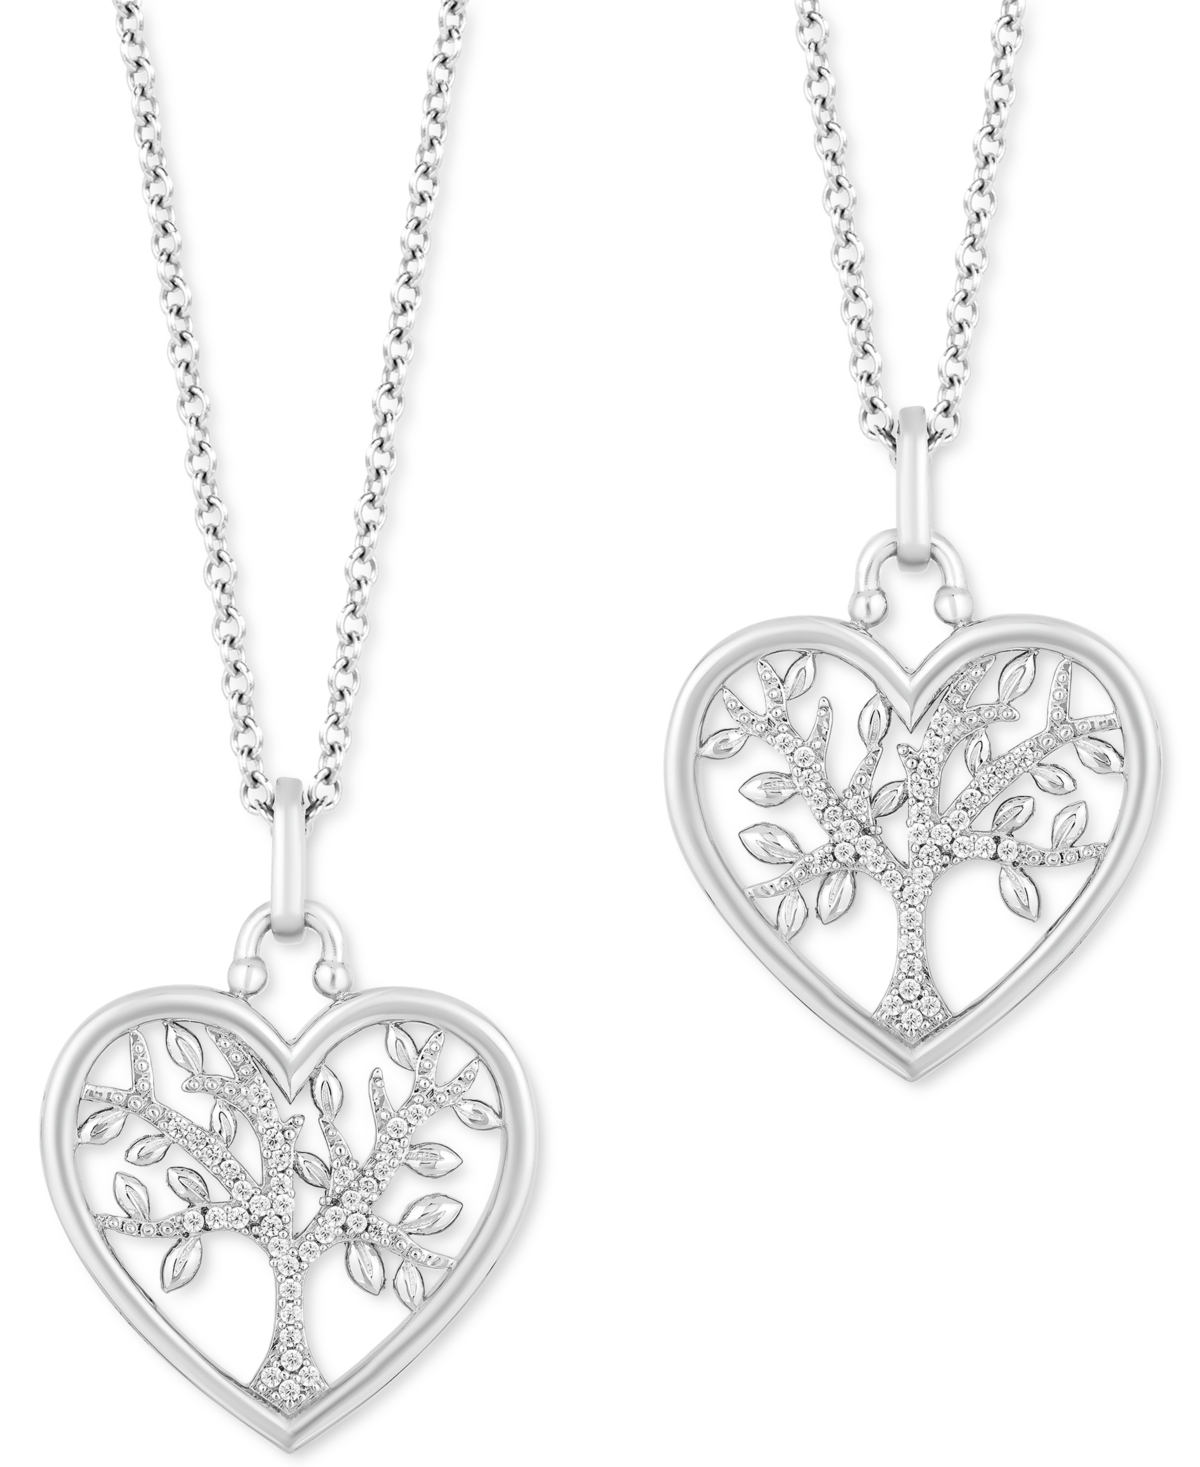 Hallmark Diamonds 2-Pc. Set Diamond "Wear One Share One" Family Tree Pendant Necklaces (1/5 ct.tw) in Sterling Silver, 16" + 2" extender